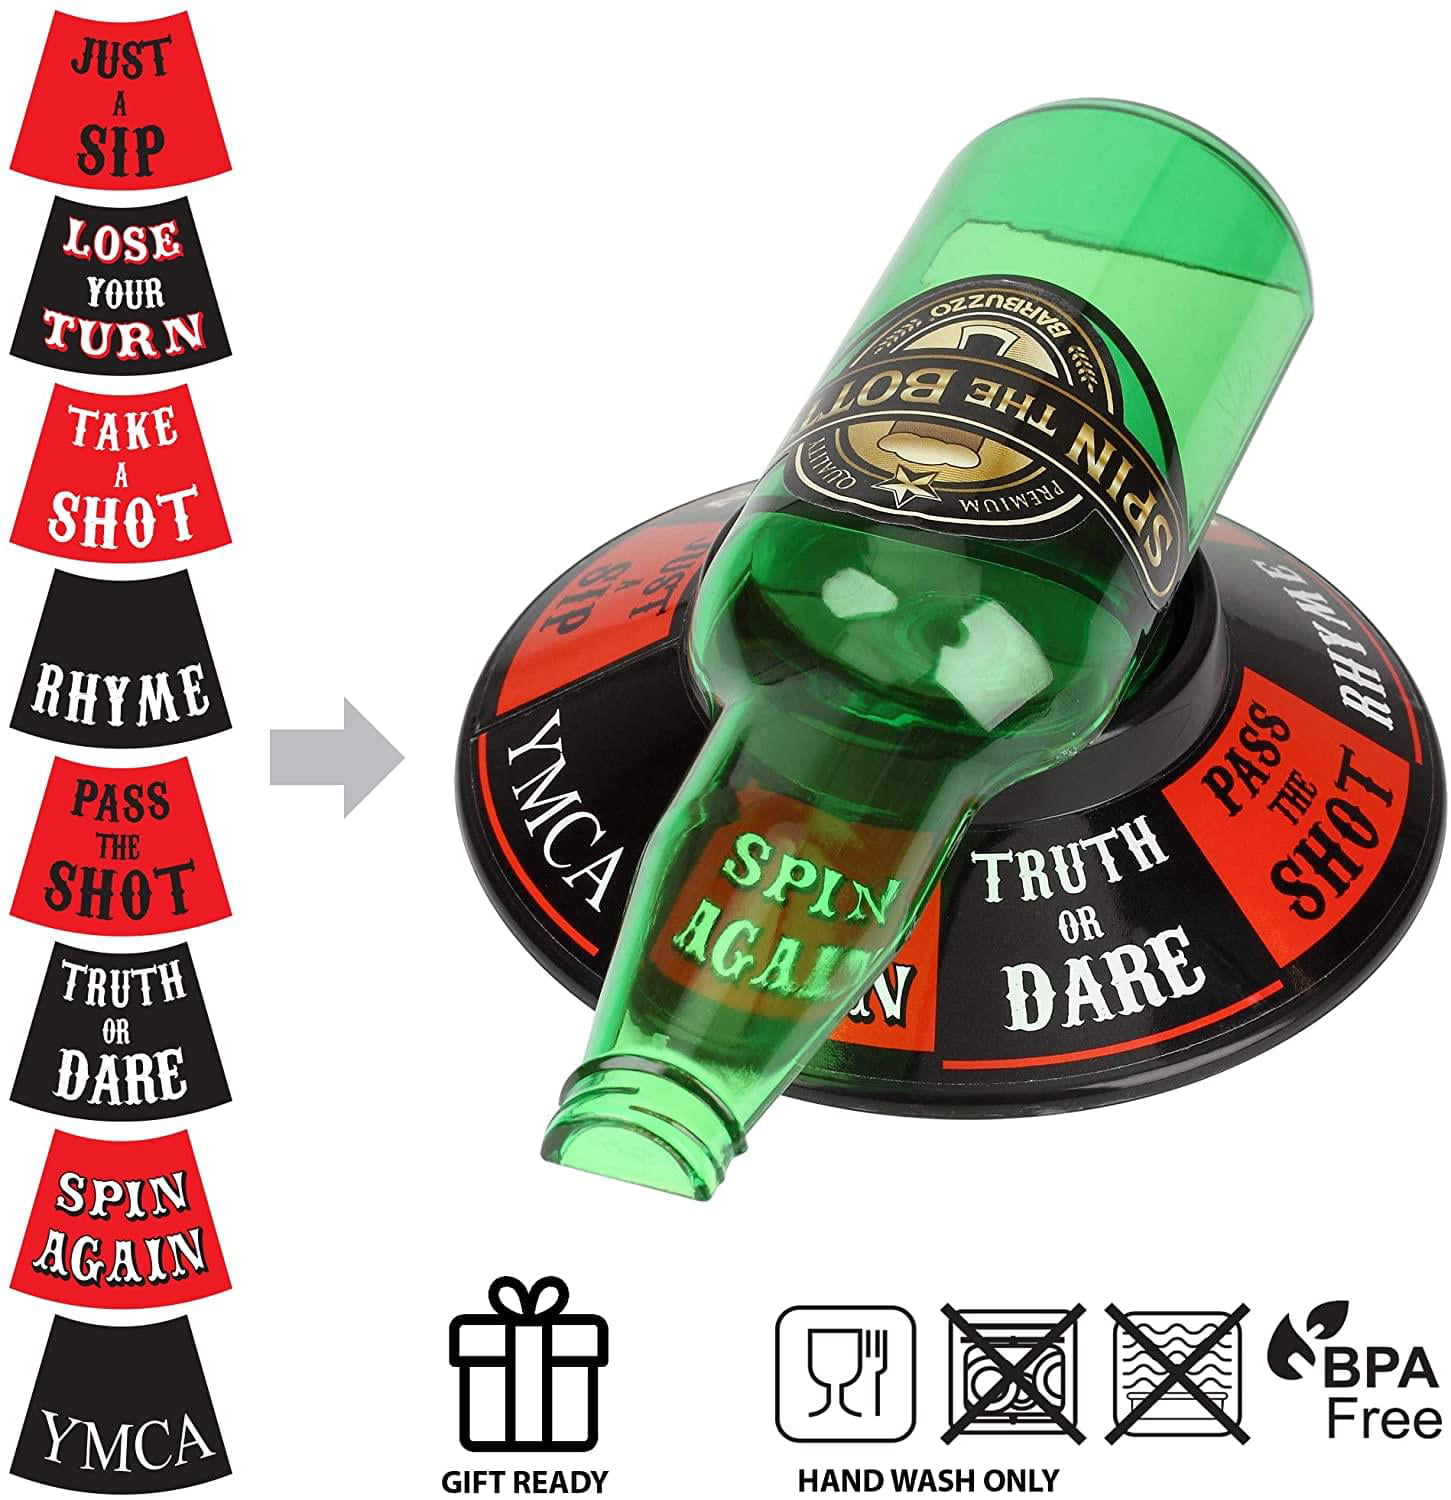 TRADITIONAL CLASSIC SPIN THE BOTTLE NOVELTY DRINKING PARTY GAME NEW WITH BOX 